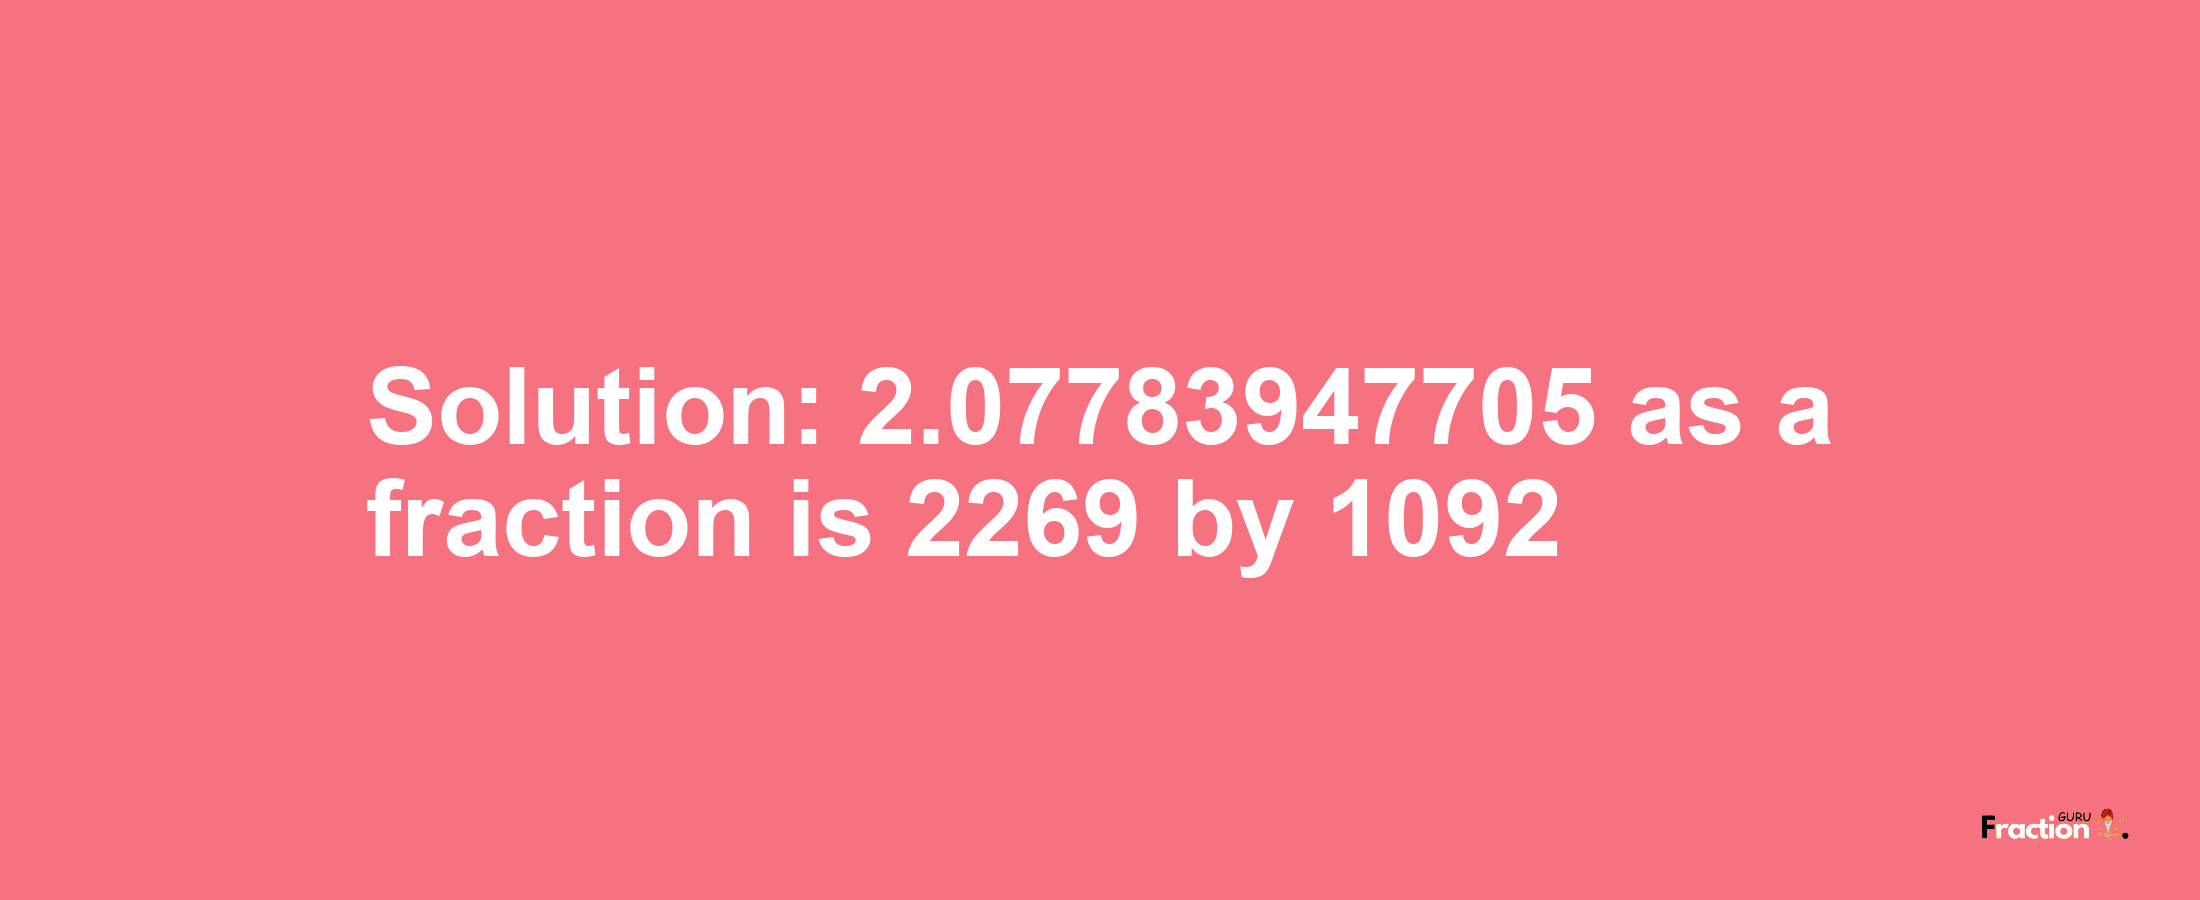 Solution:2.07783947705 as a fraction is 2269/1092